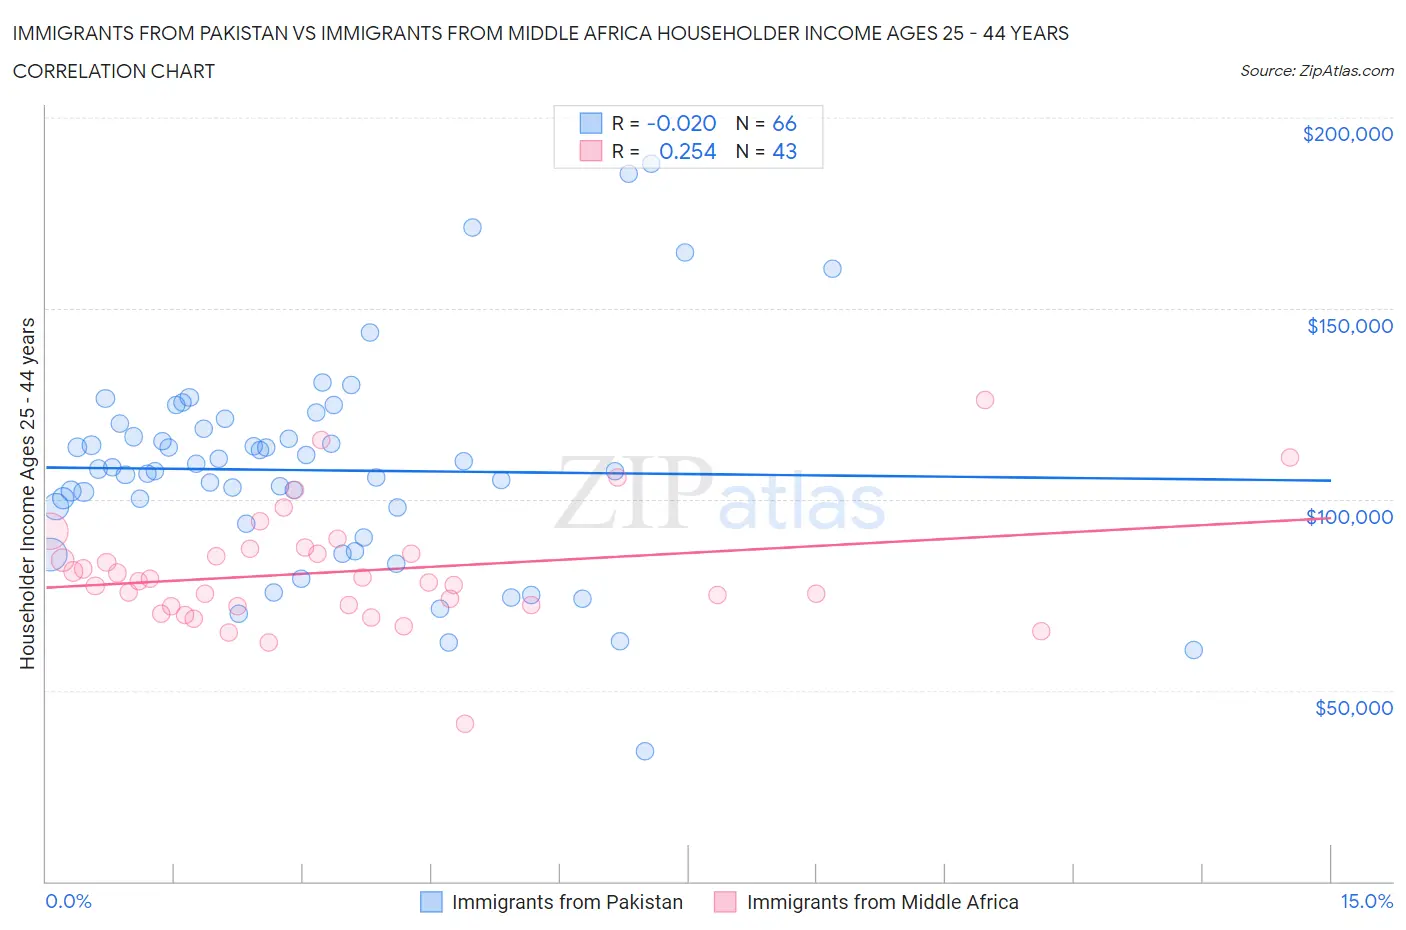 Immigrants from Pakistan vs Immigrants from Middle Africa Householder Income Ages 25 - 44 years